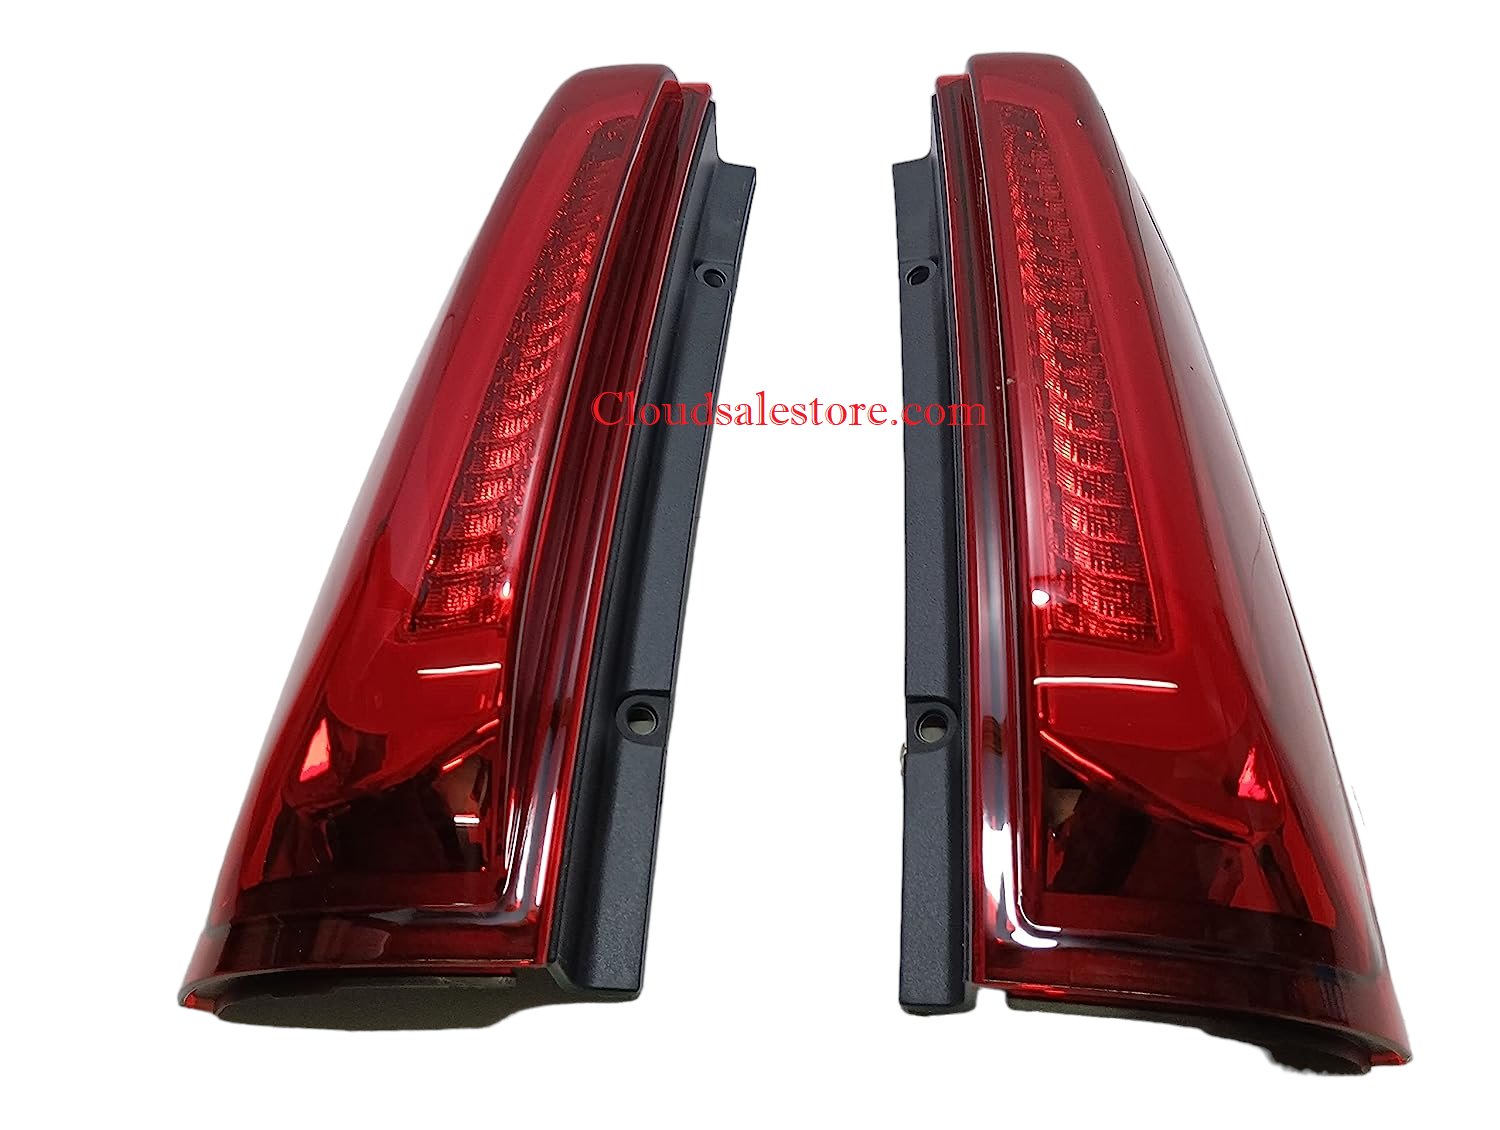 LED Rear Pillar Cluster Lights For Mahindra Scorpio 2017 Onward With Scanning and Matrix Mode – Set Of 2 Image 